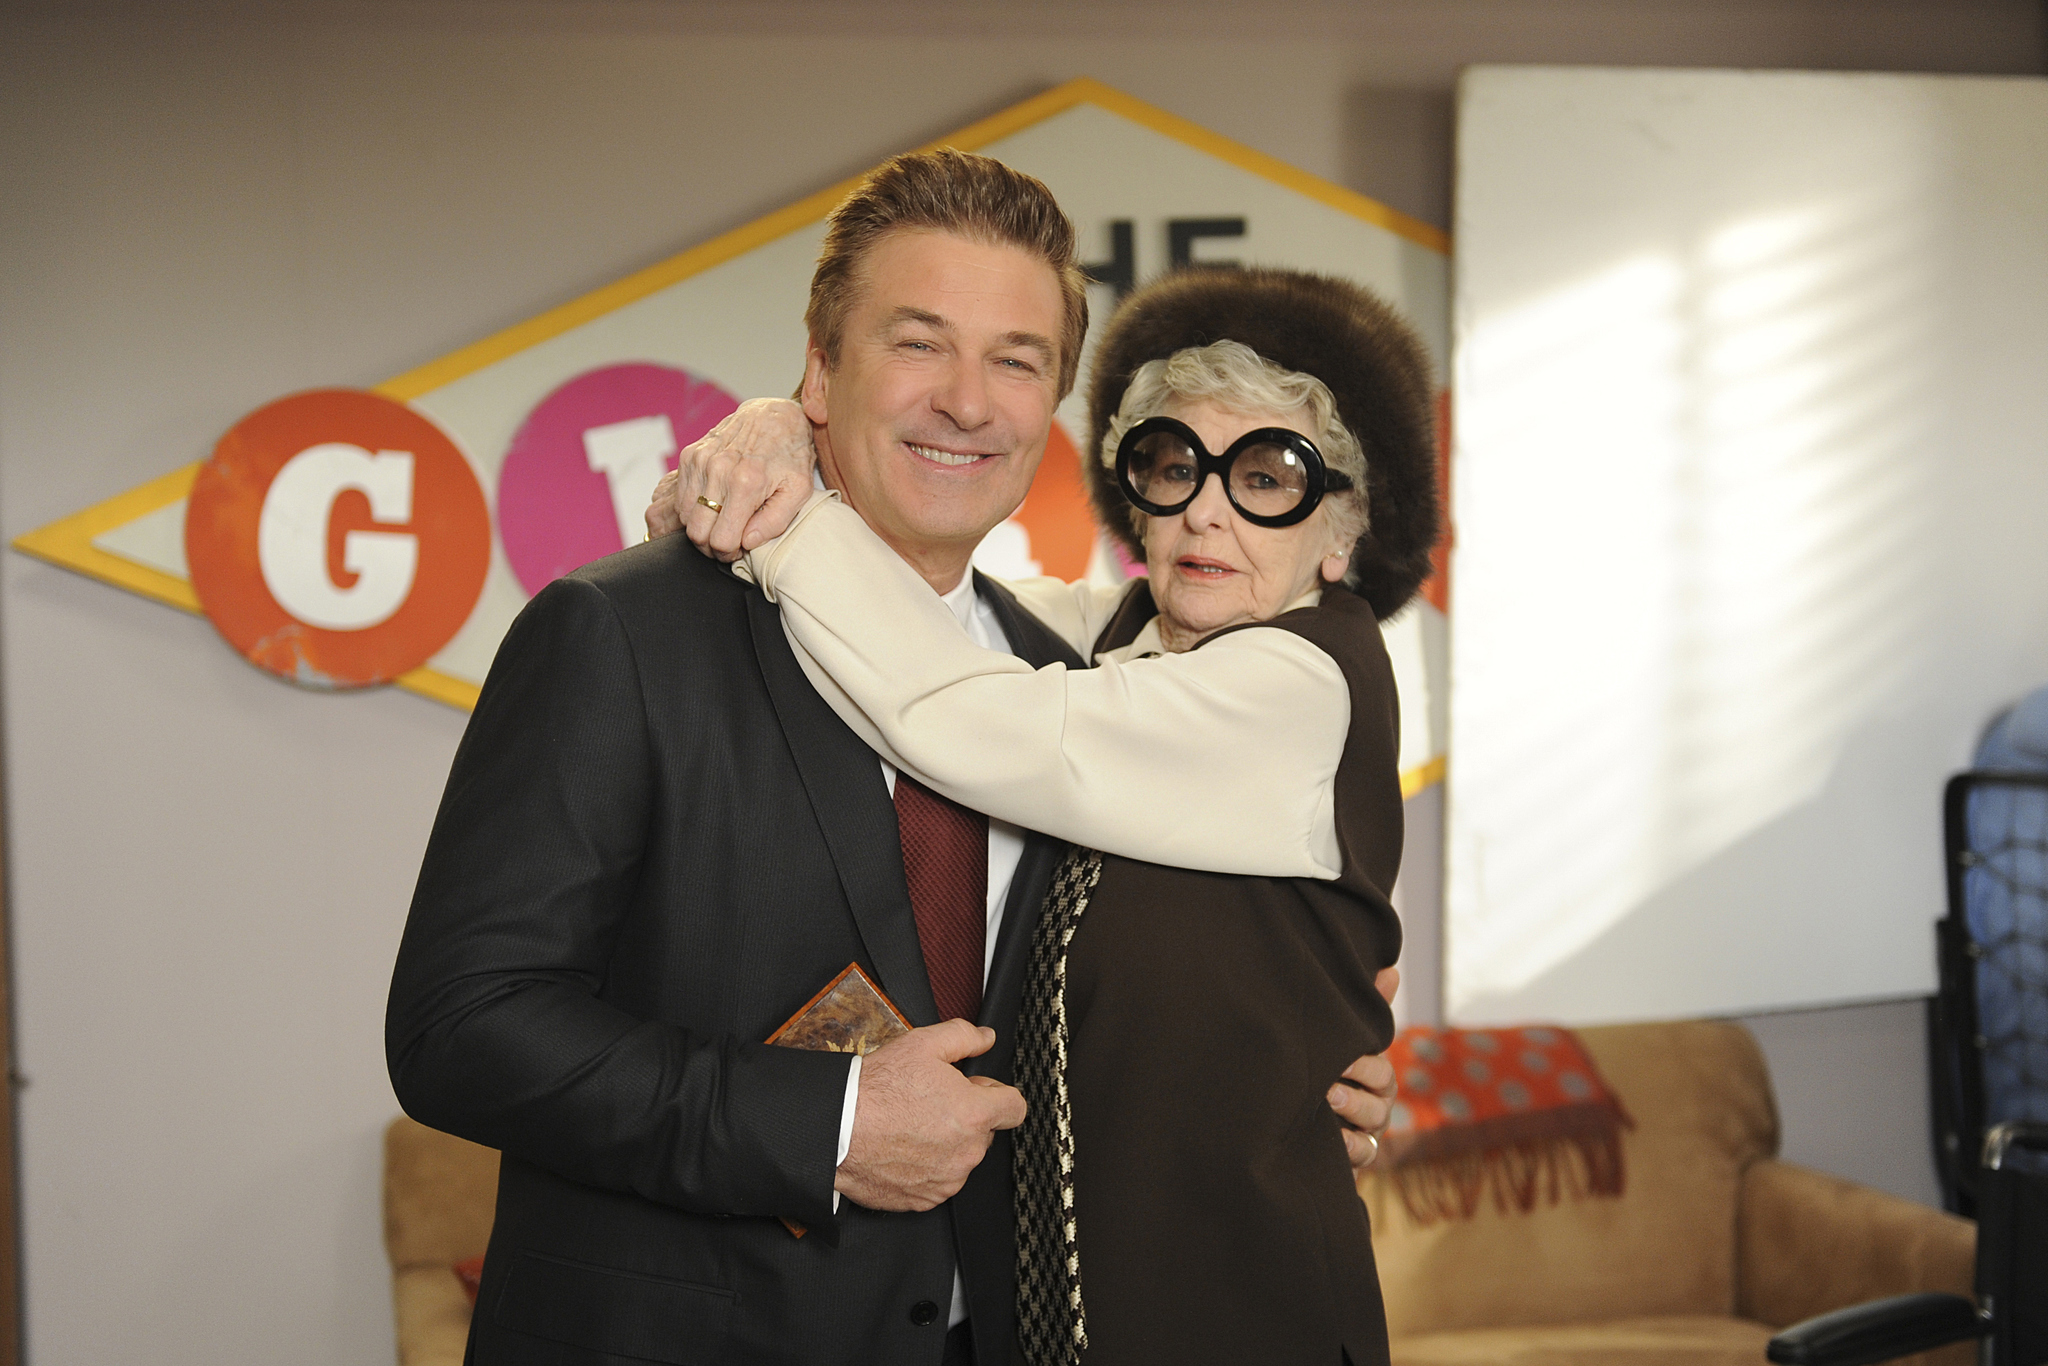 Alec Baldwin and Elaine Stritch at event of 30 Rock (2006)